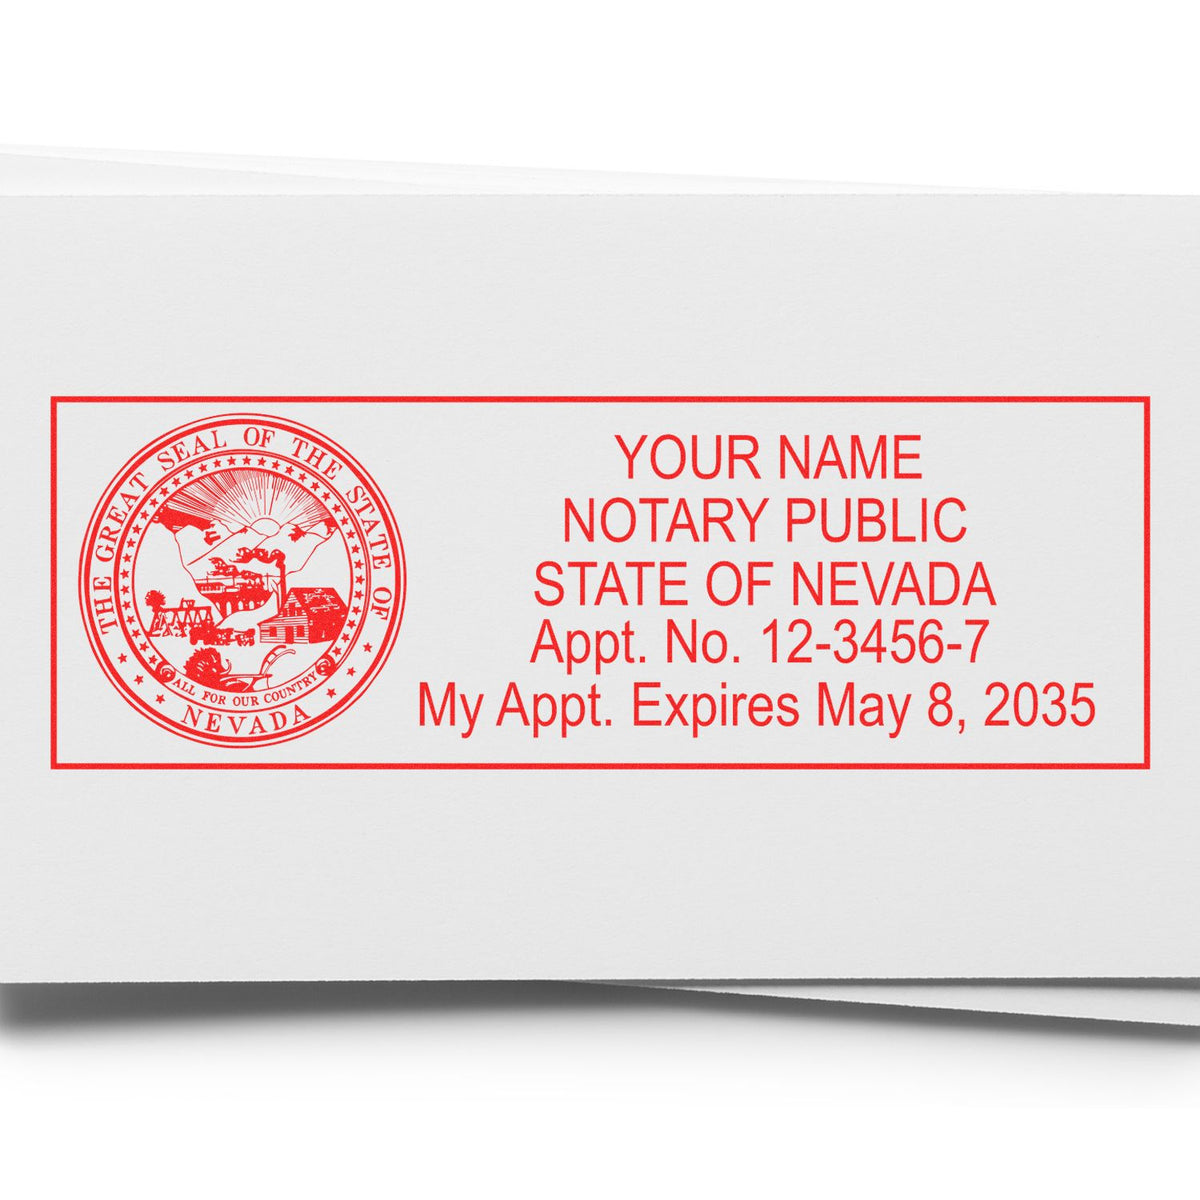 Another Example of a stamped impression of the Super Slim Nevada Notary Public Stamp on a piece of office paper.